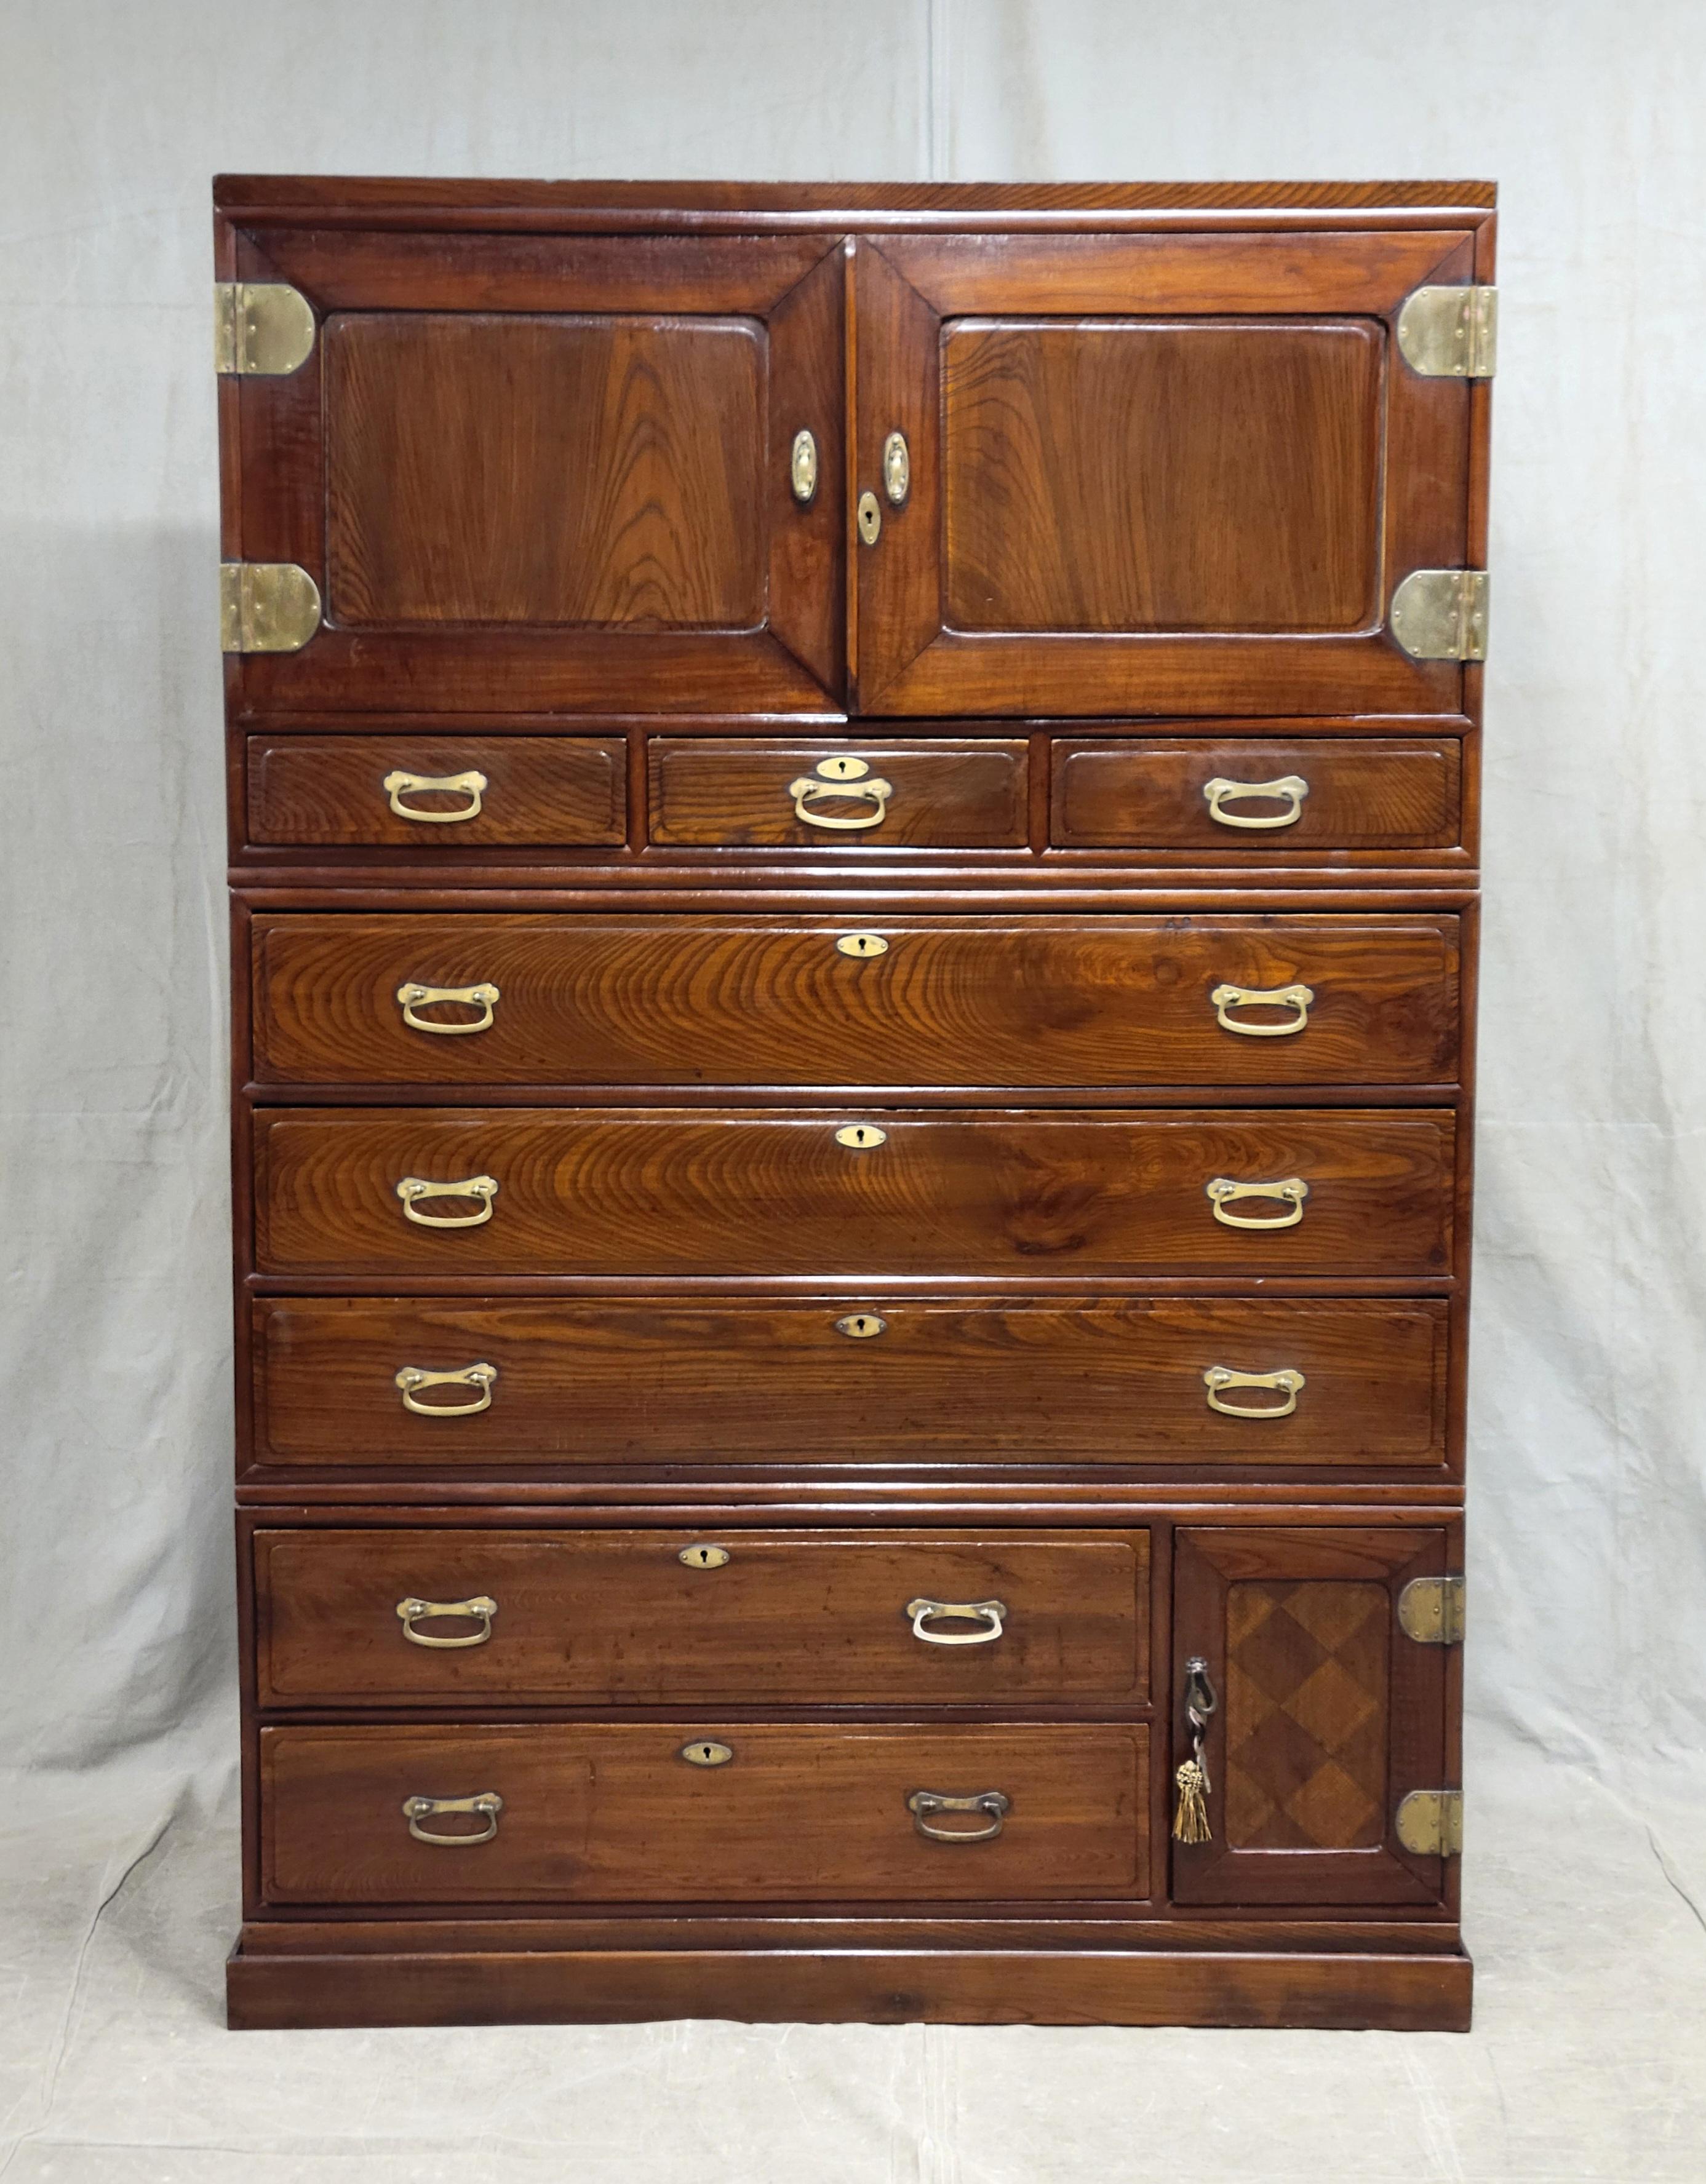 A stunning vintage Korean (in the Japanese style) large elm (keyaki) tansu chest with original cast brass hardware. The hardware and linen chest pine sliding drawers show a European influence indicating that this cabinet may have been created for a